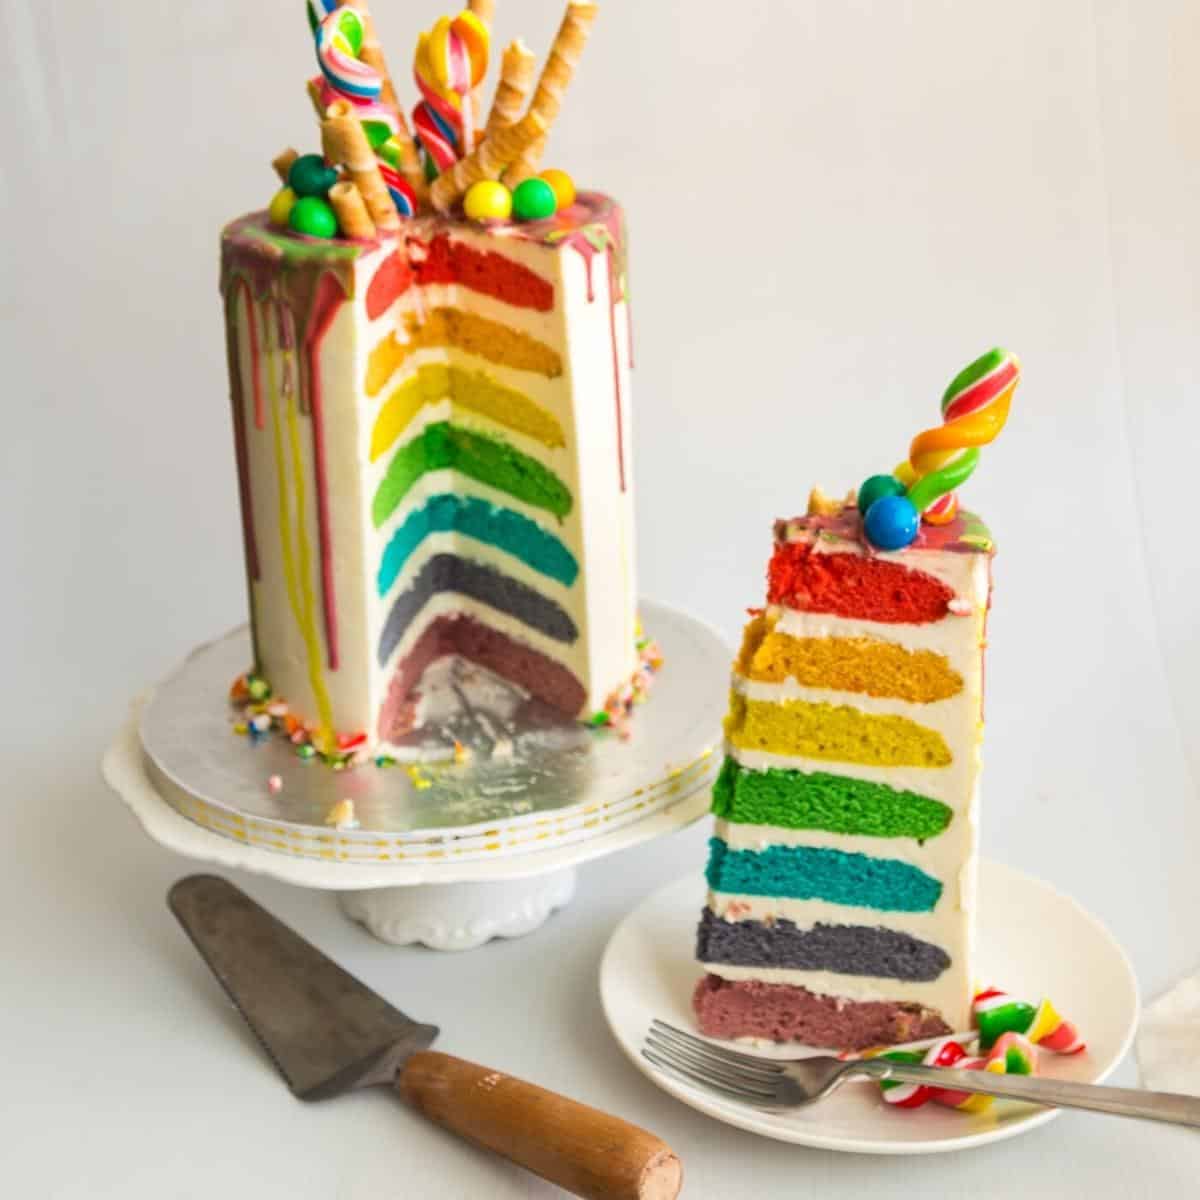 Rainbow cake topped with candy and wafers